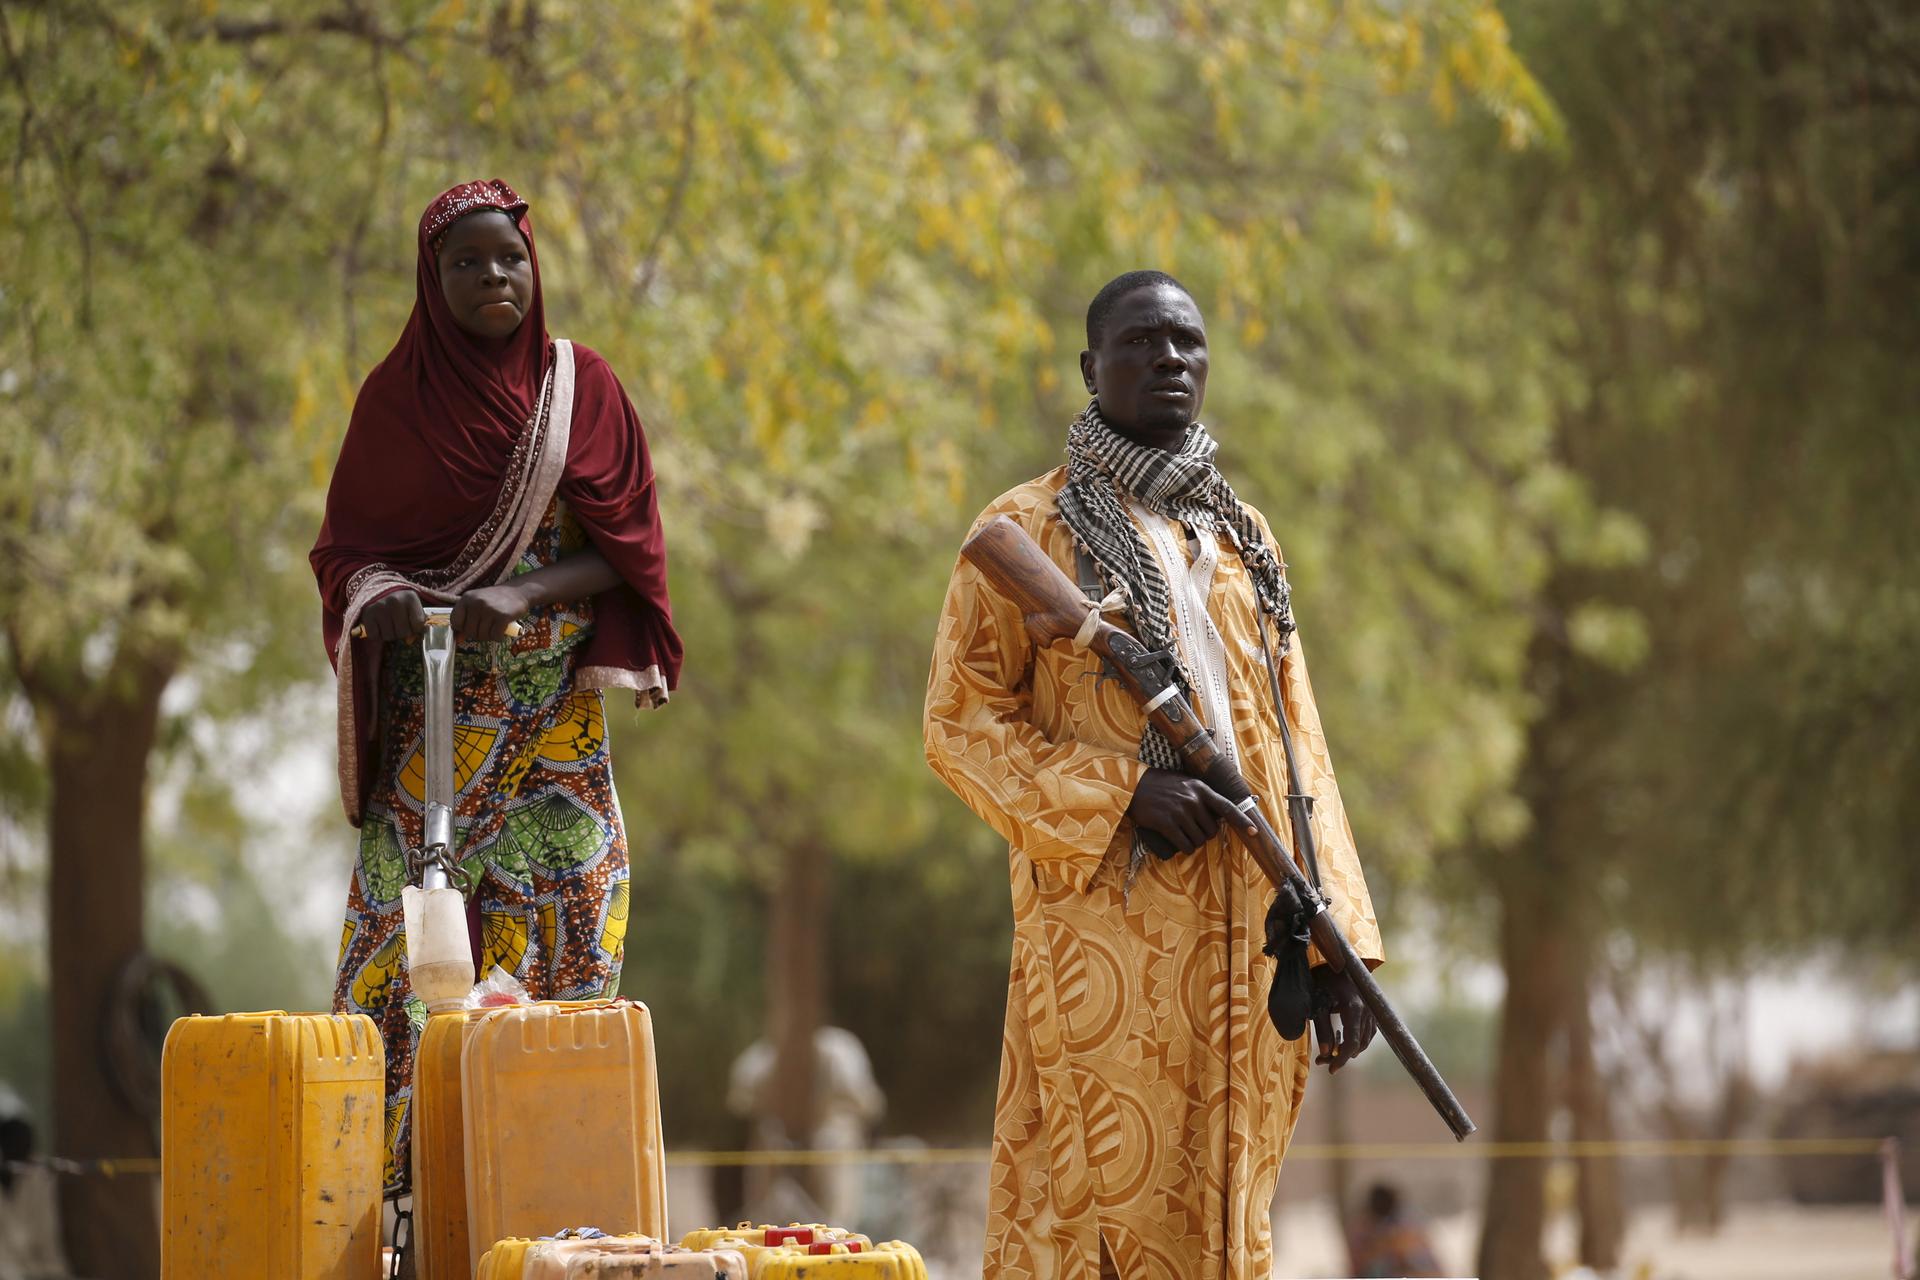 A member of a civilian vigilante group holds a hunting rifle while a woman pumps water into jerrycans in Kerawa, Cameroon, March 16, 2016.